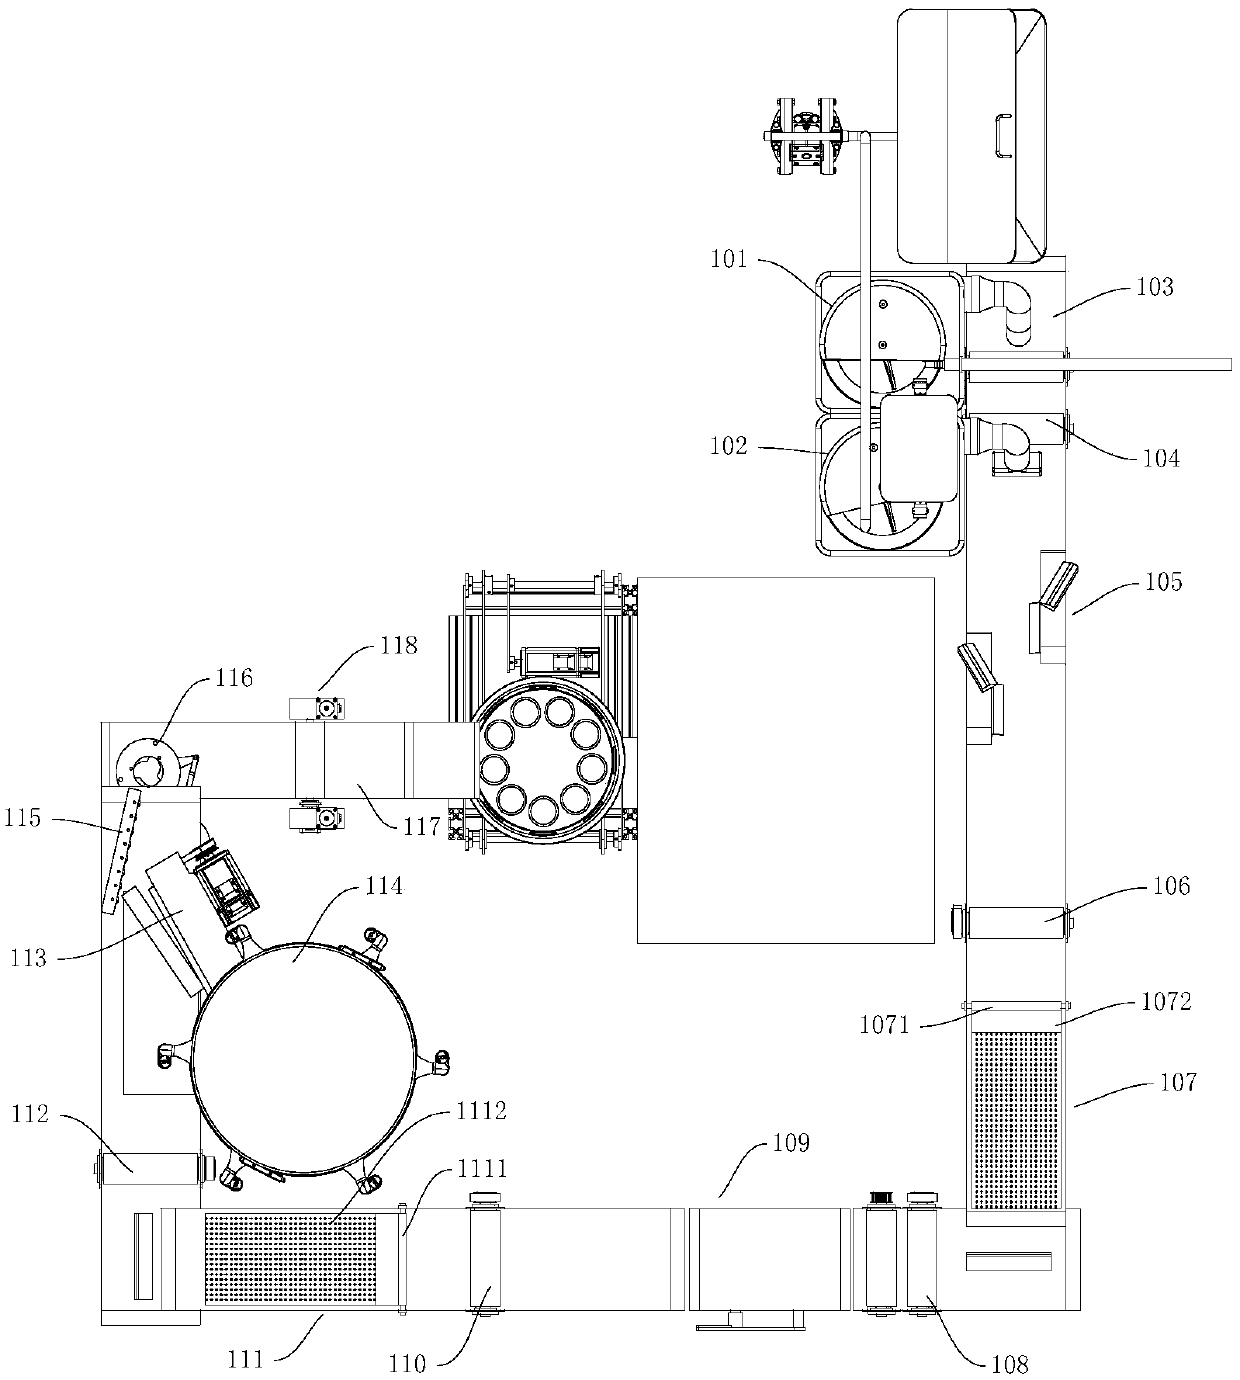 Baking device and food making equipment